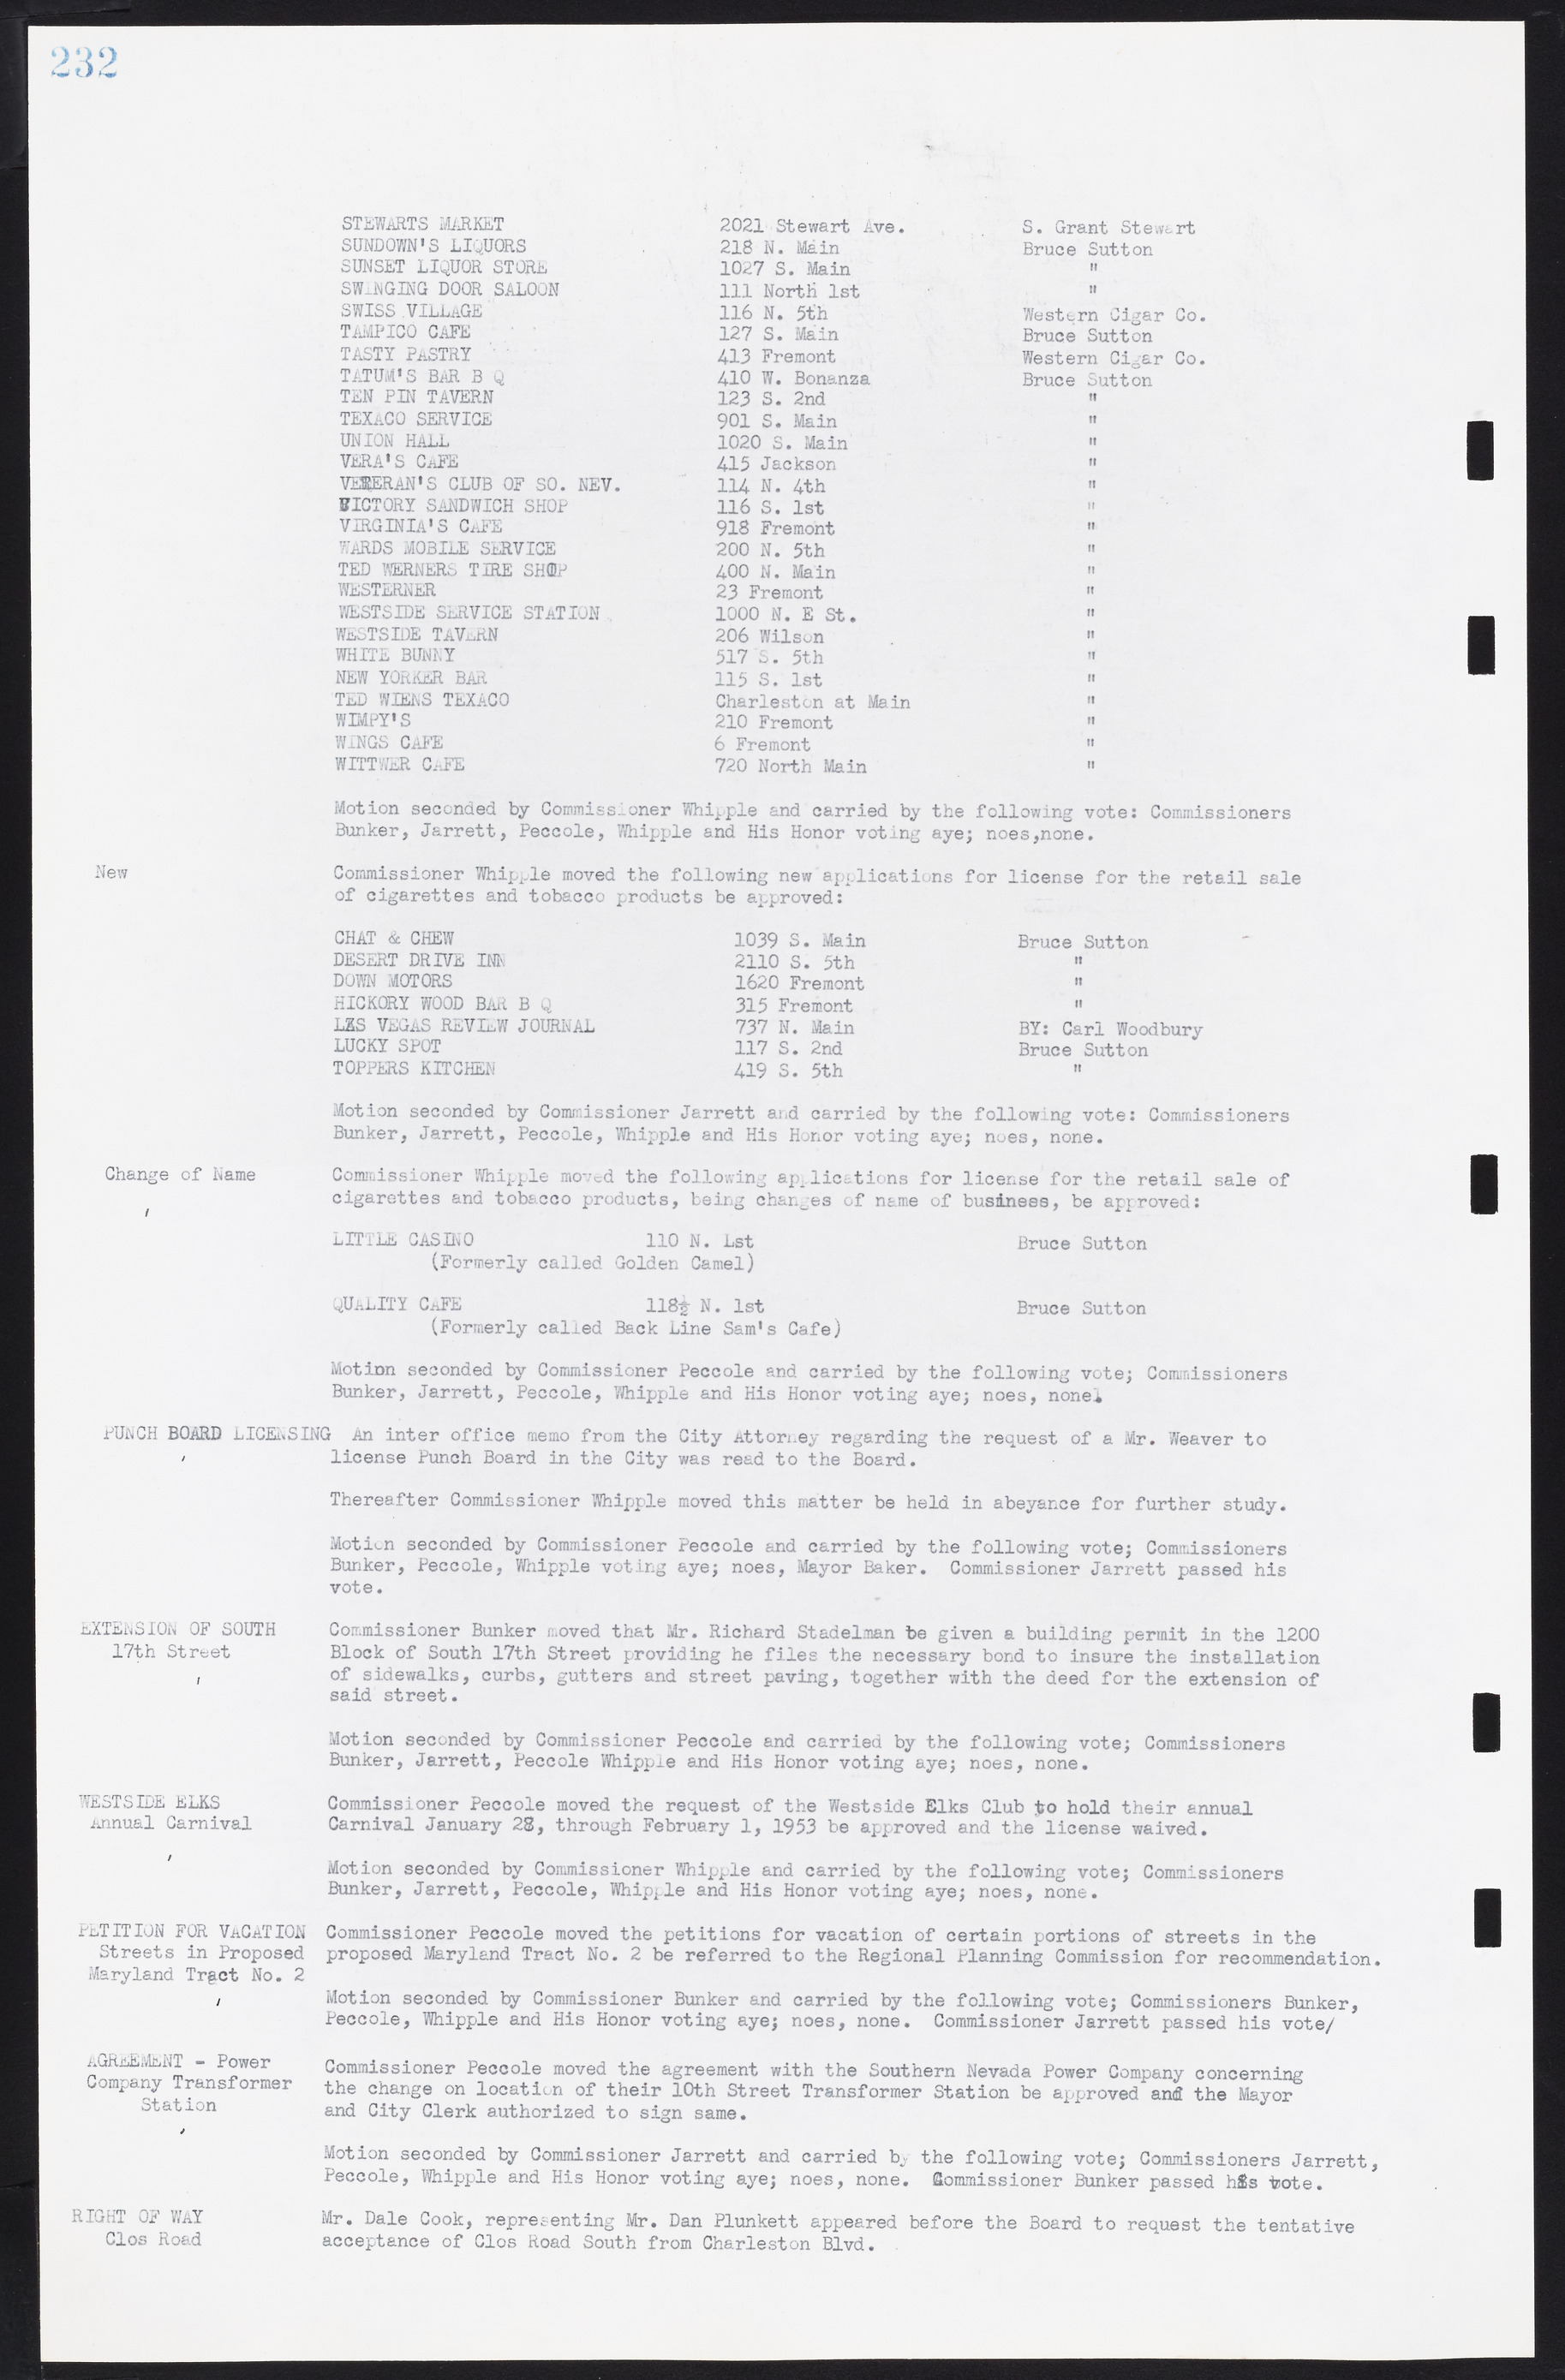 Las Vegas City Commission Minutes, May 26, 1952 to February 17, 1954, lvc000008-248